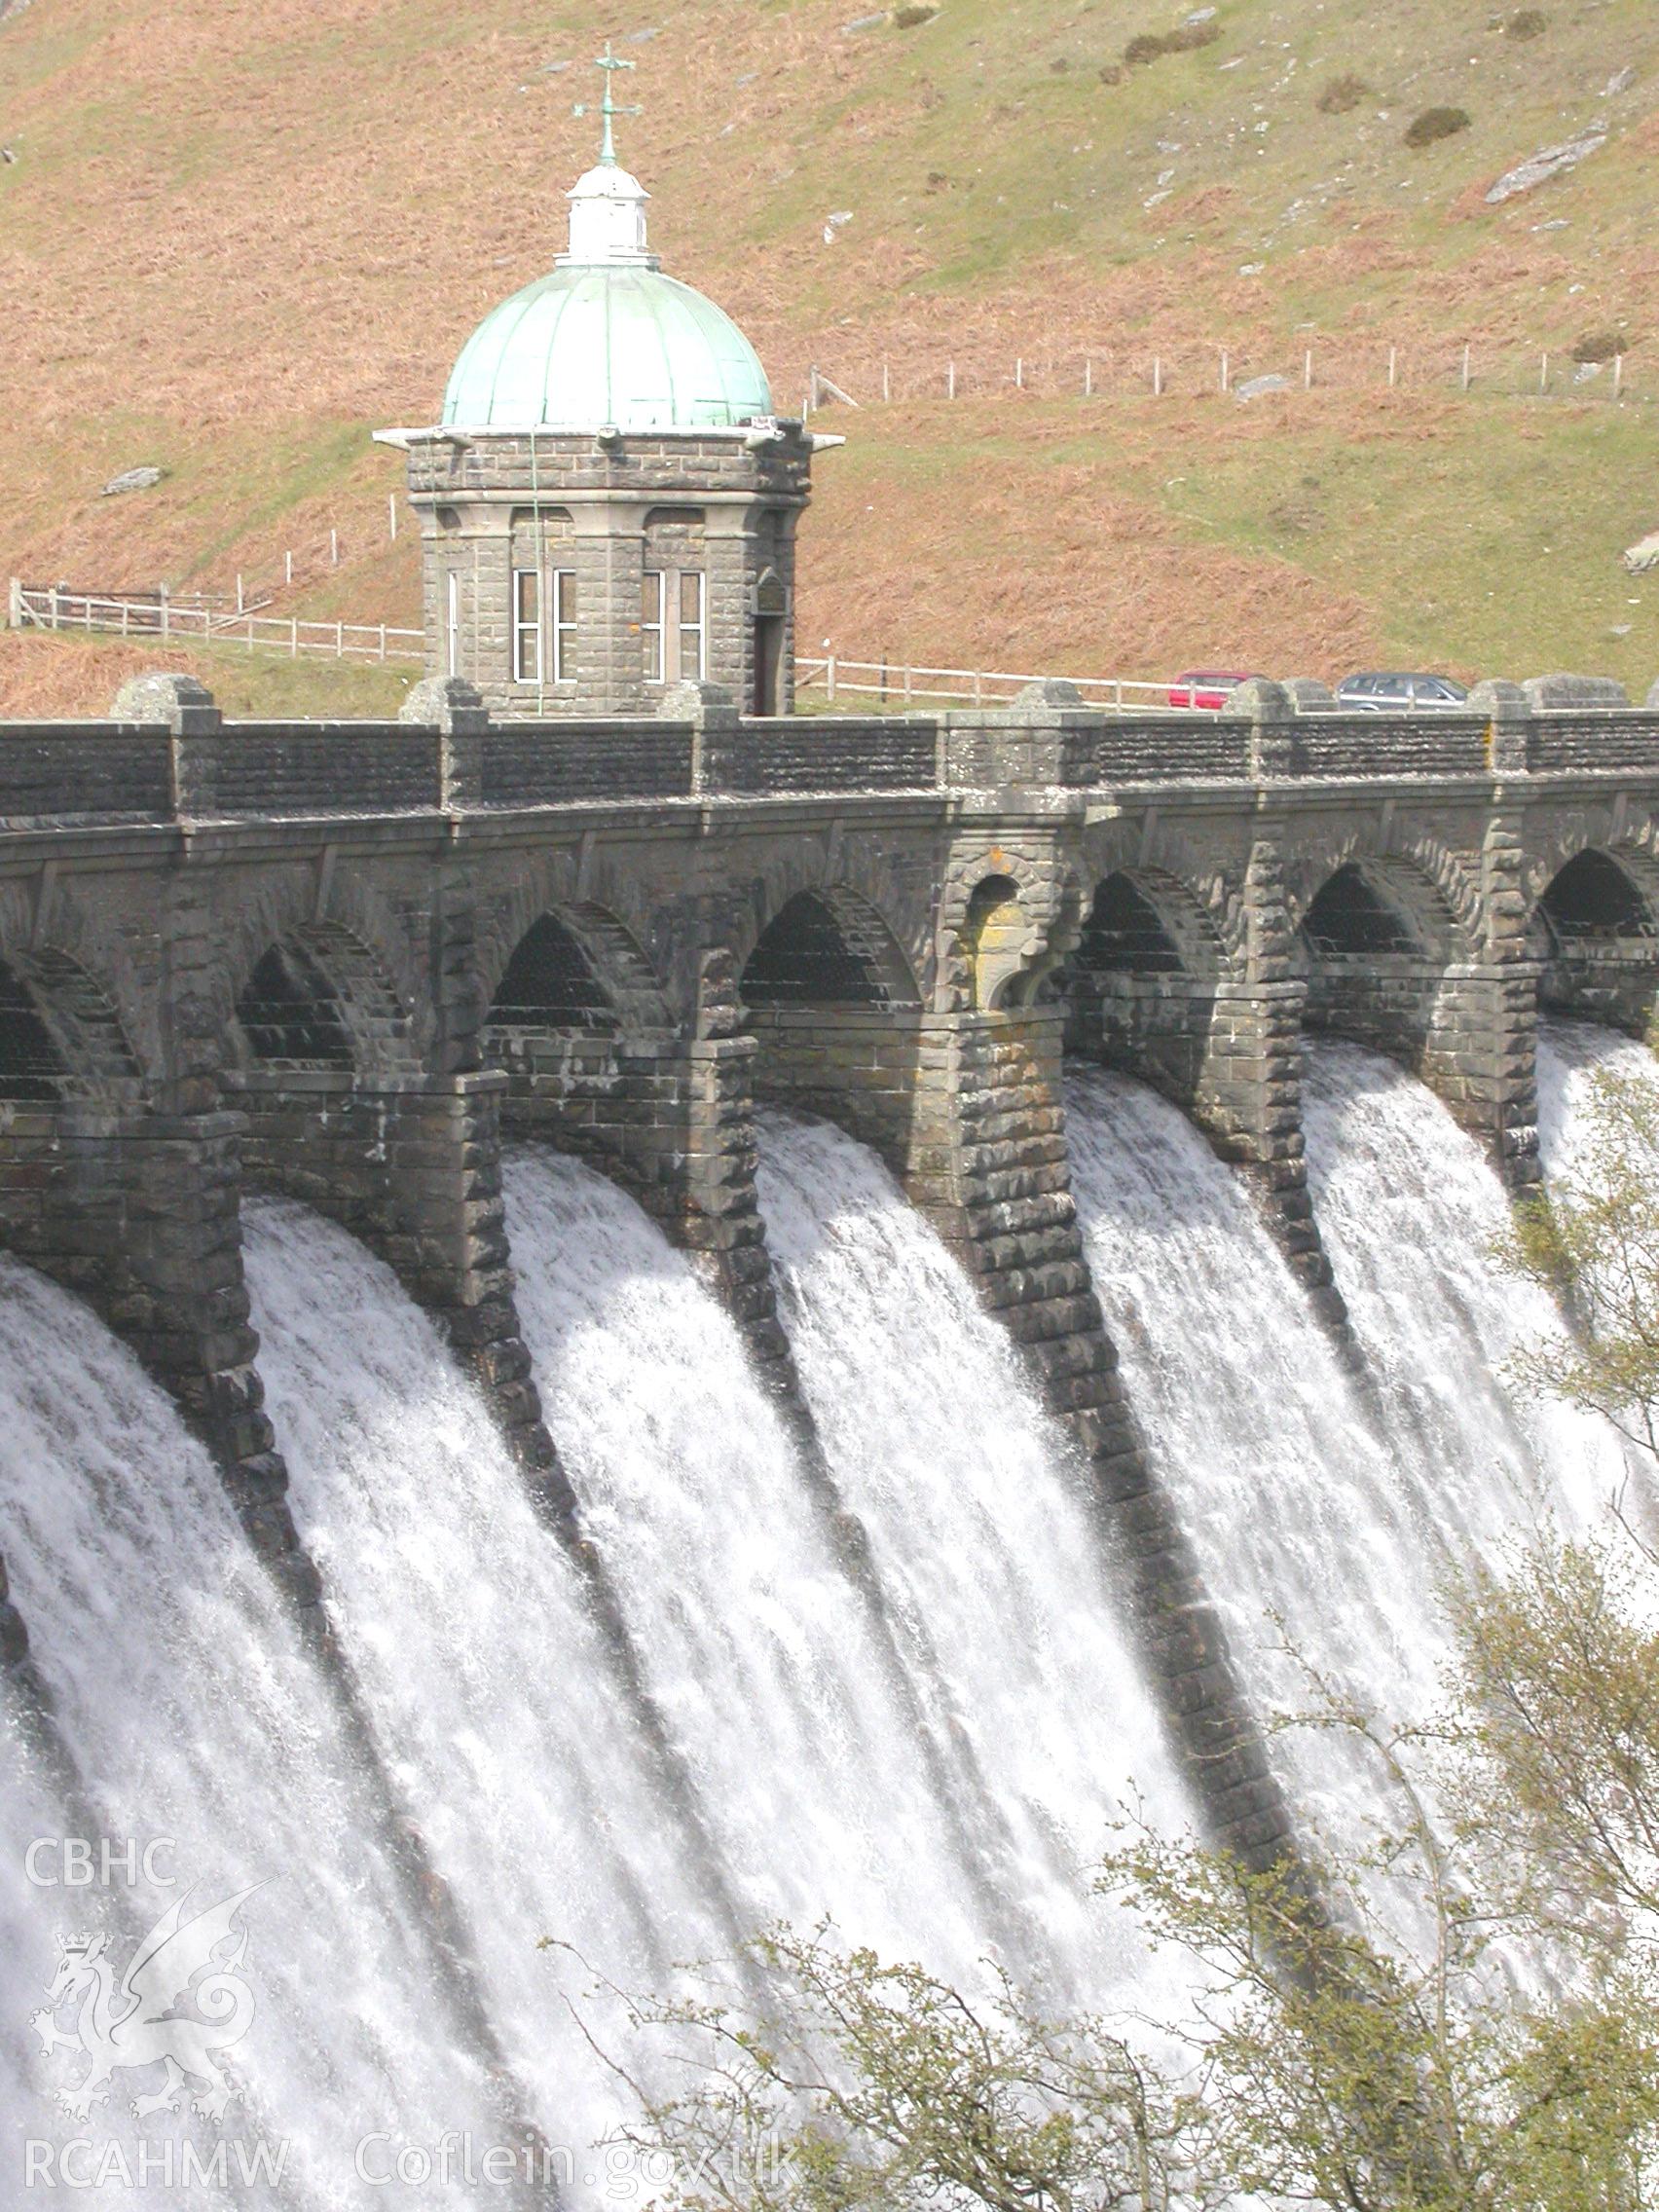 Dam crest and valve tower from the south-west.